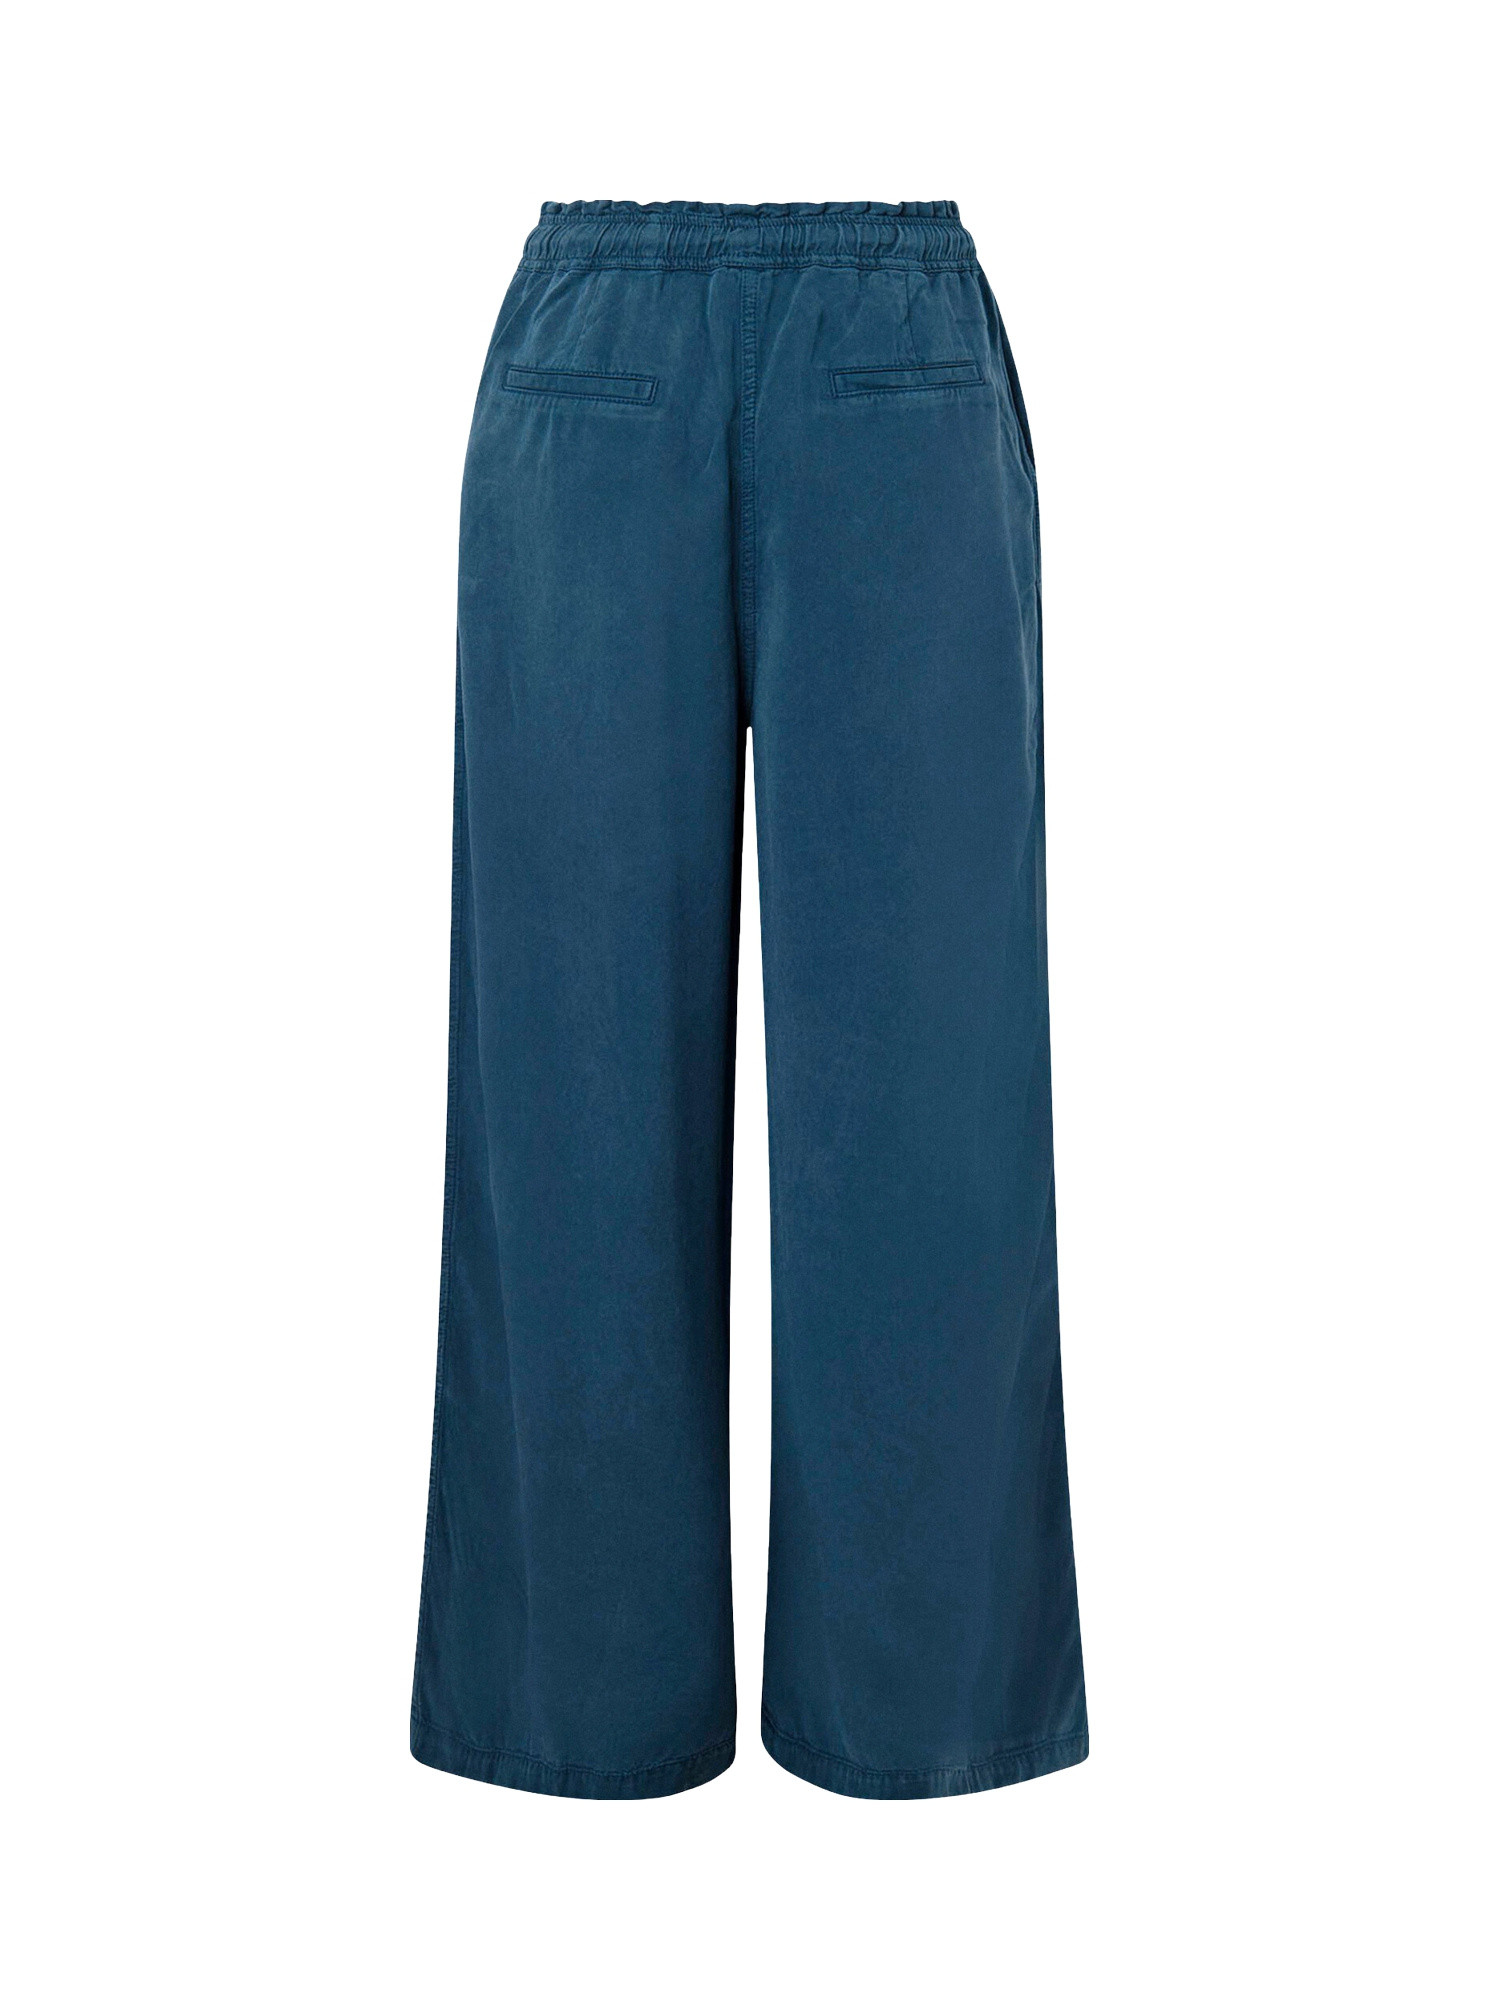 Pepe Jeans - High waisted trousers, Dark Blue, large image number 1